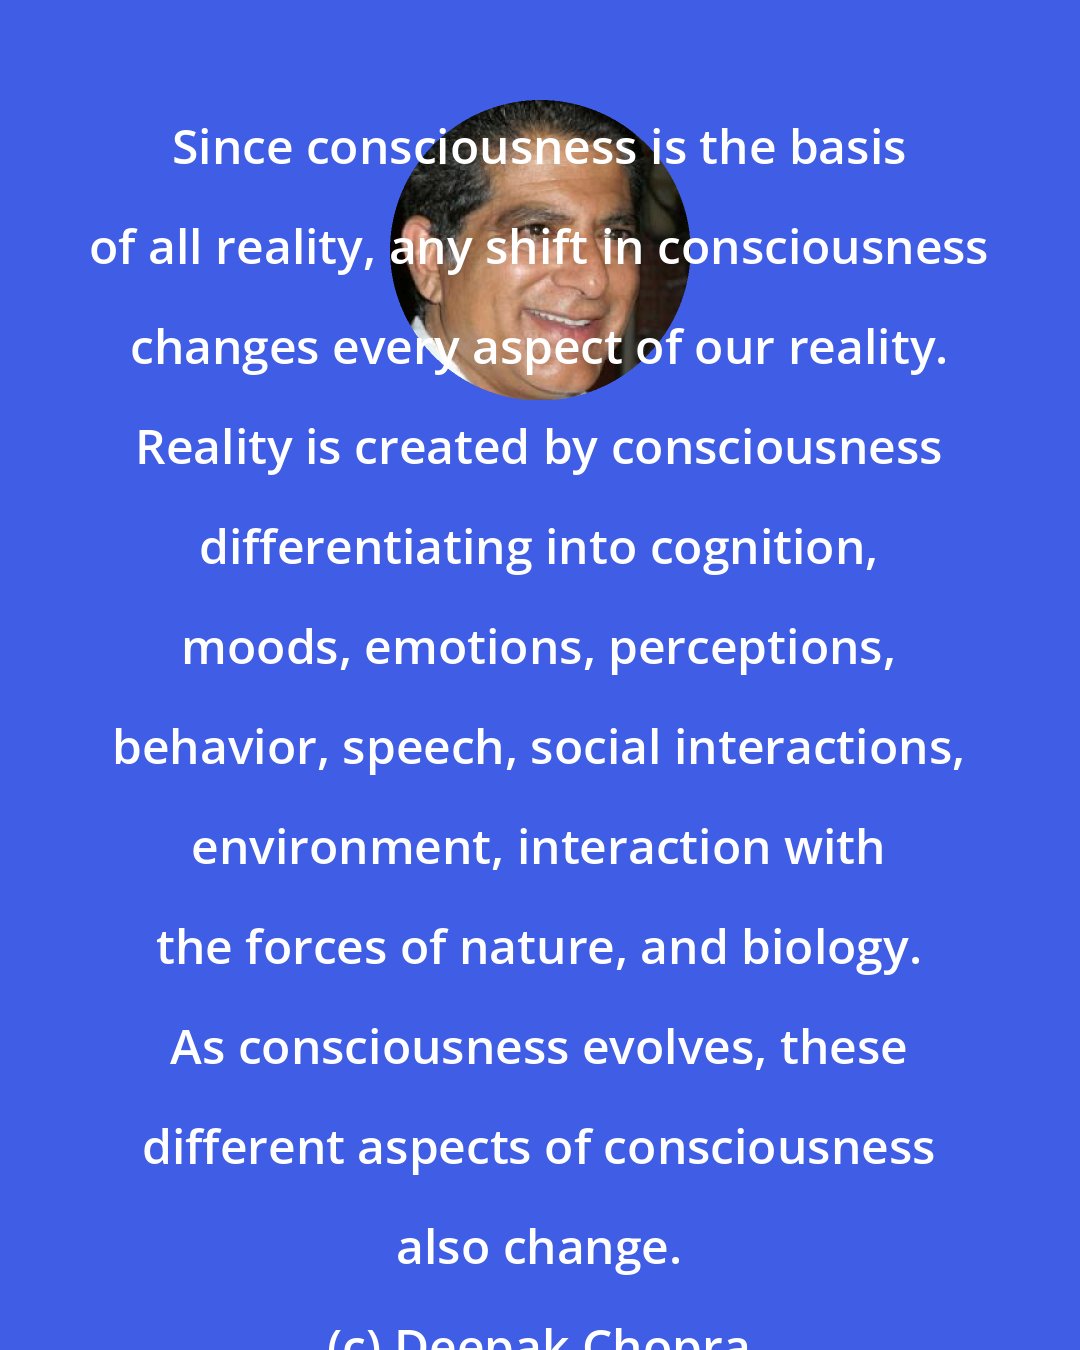 Deepak Chopra: Since consciousness is the basis of all reality, any shift in consciousness changes every aspect of our reality. Reality is created by consciousness differentiating into cognition, moods, emotions, perceptions, behavior, speech, social interactions, environment, interaction with the forces of nature, and biology. As consciousness evolves, these different aspects of consciousness also change.